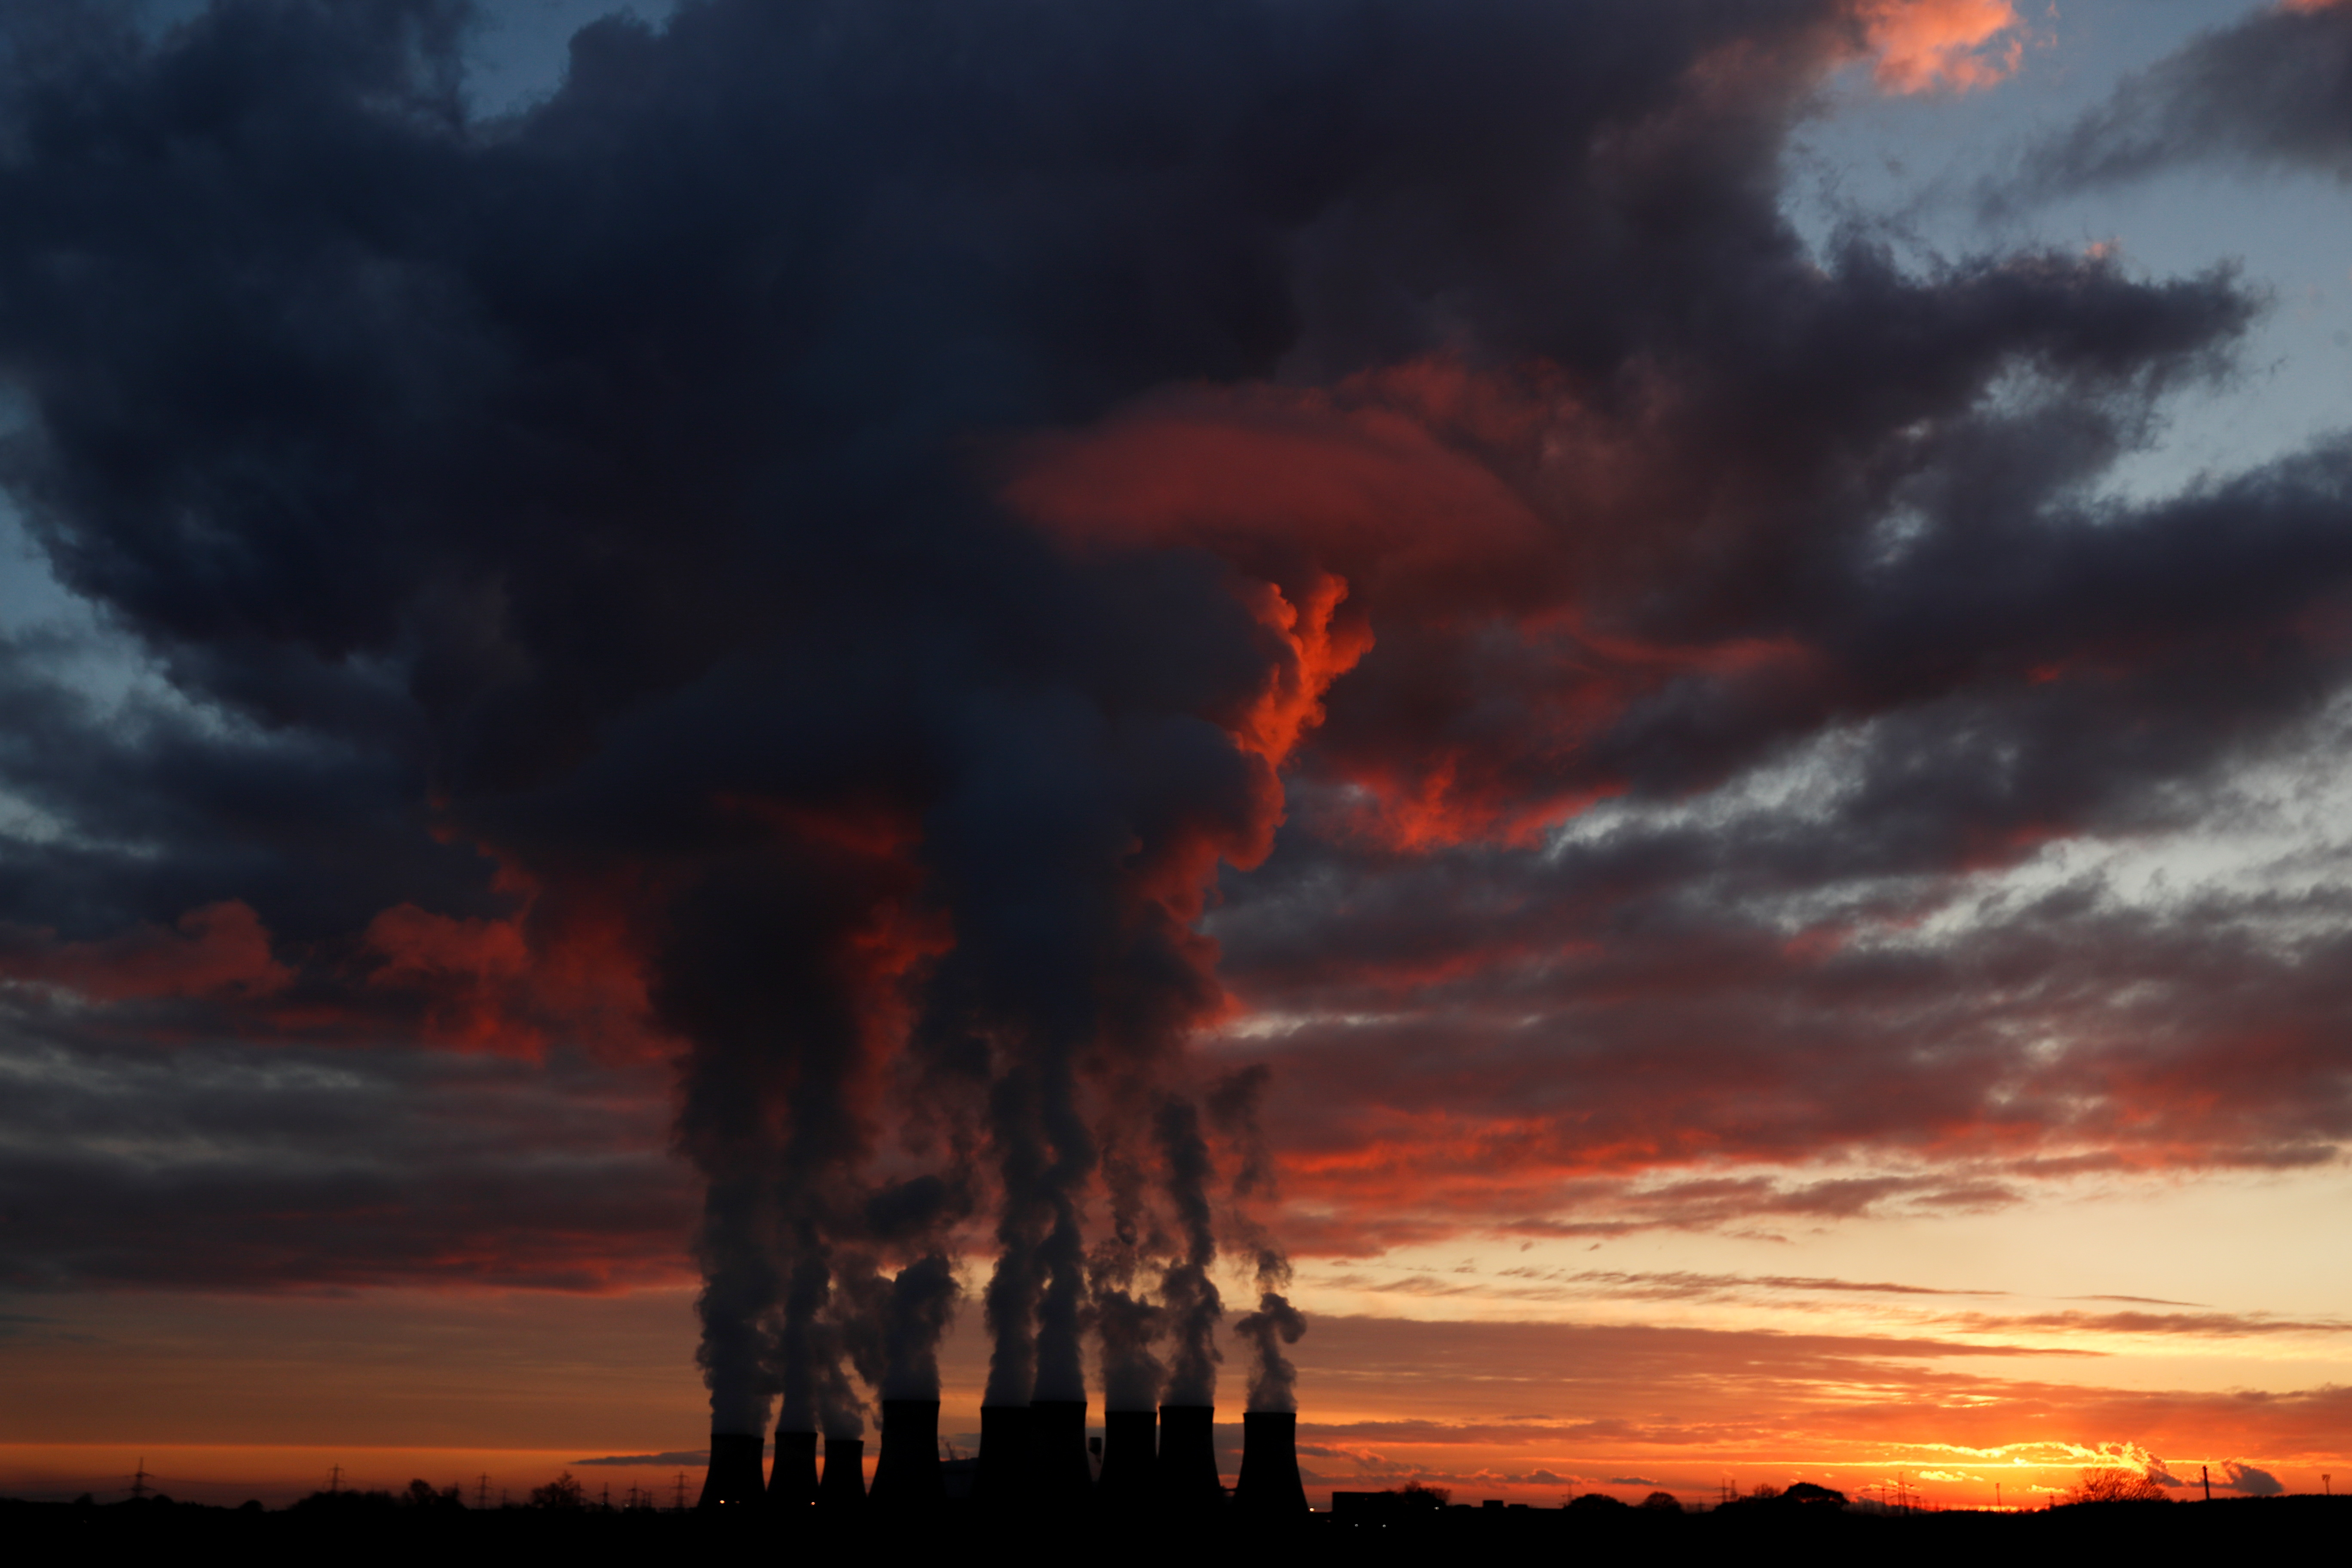 Sunset over Drax power station in North Yorkshire